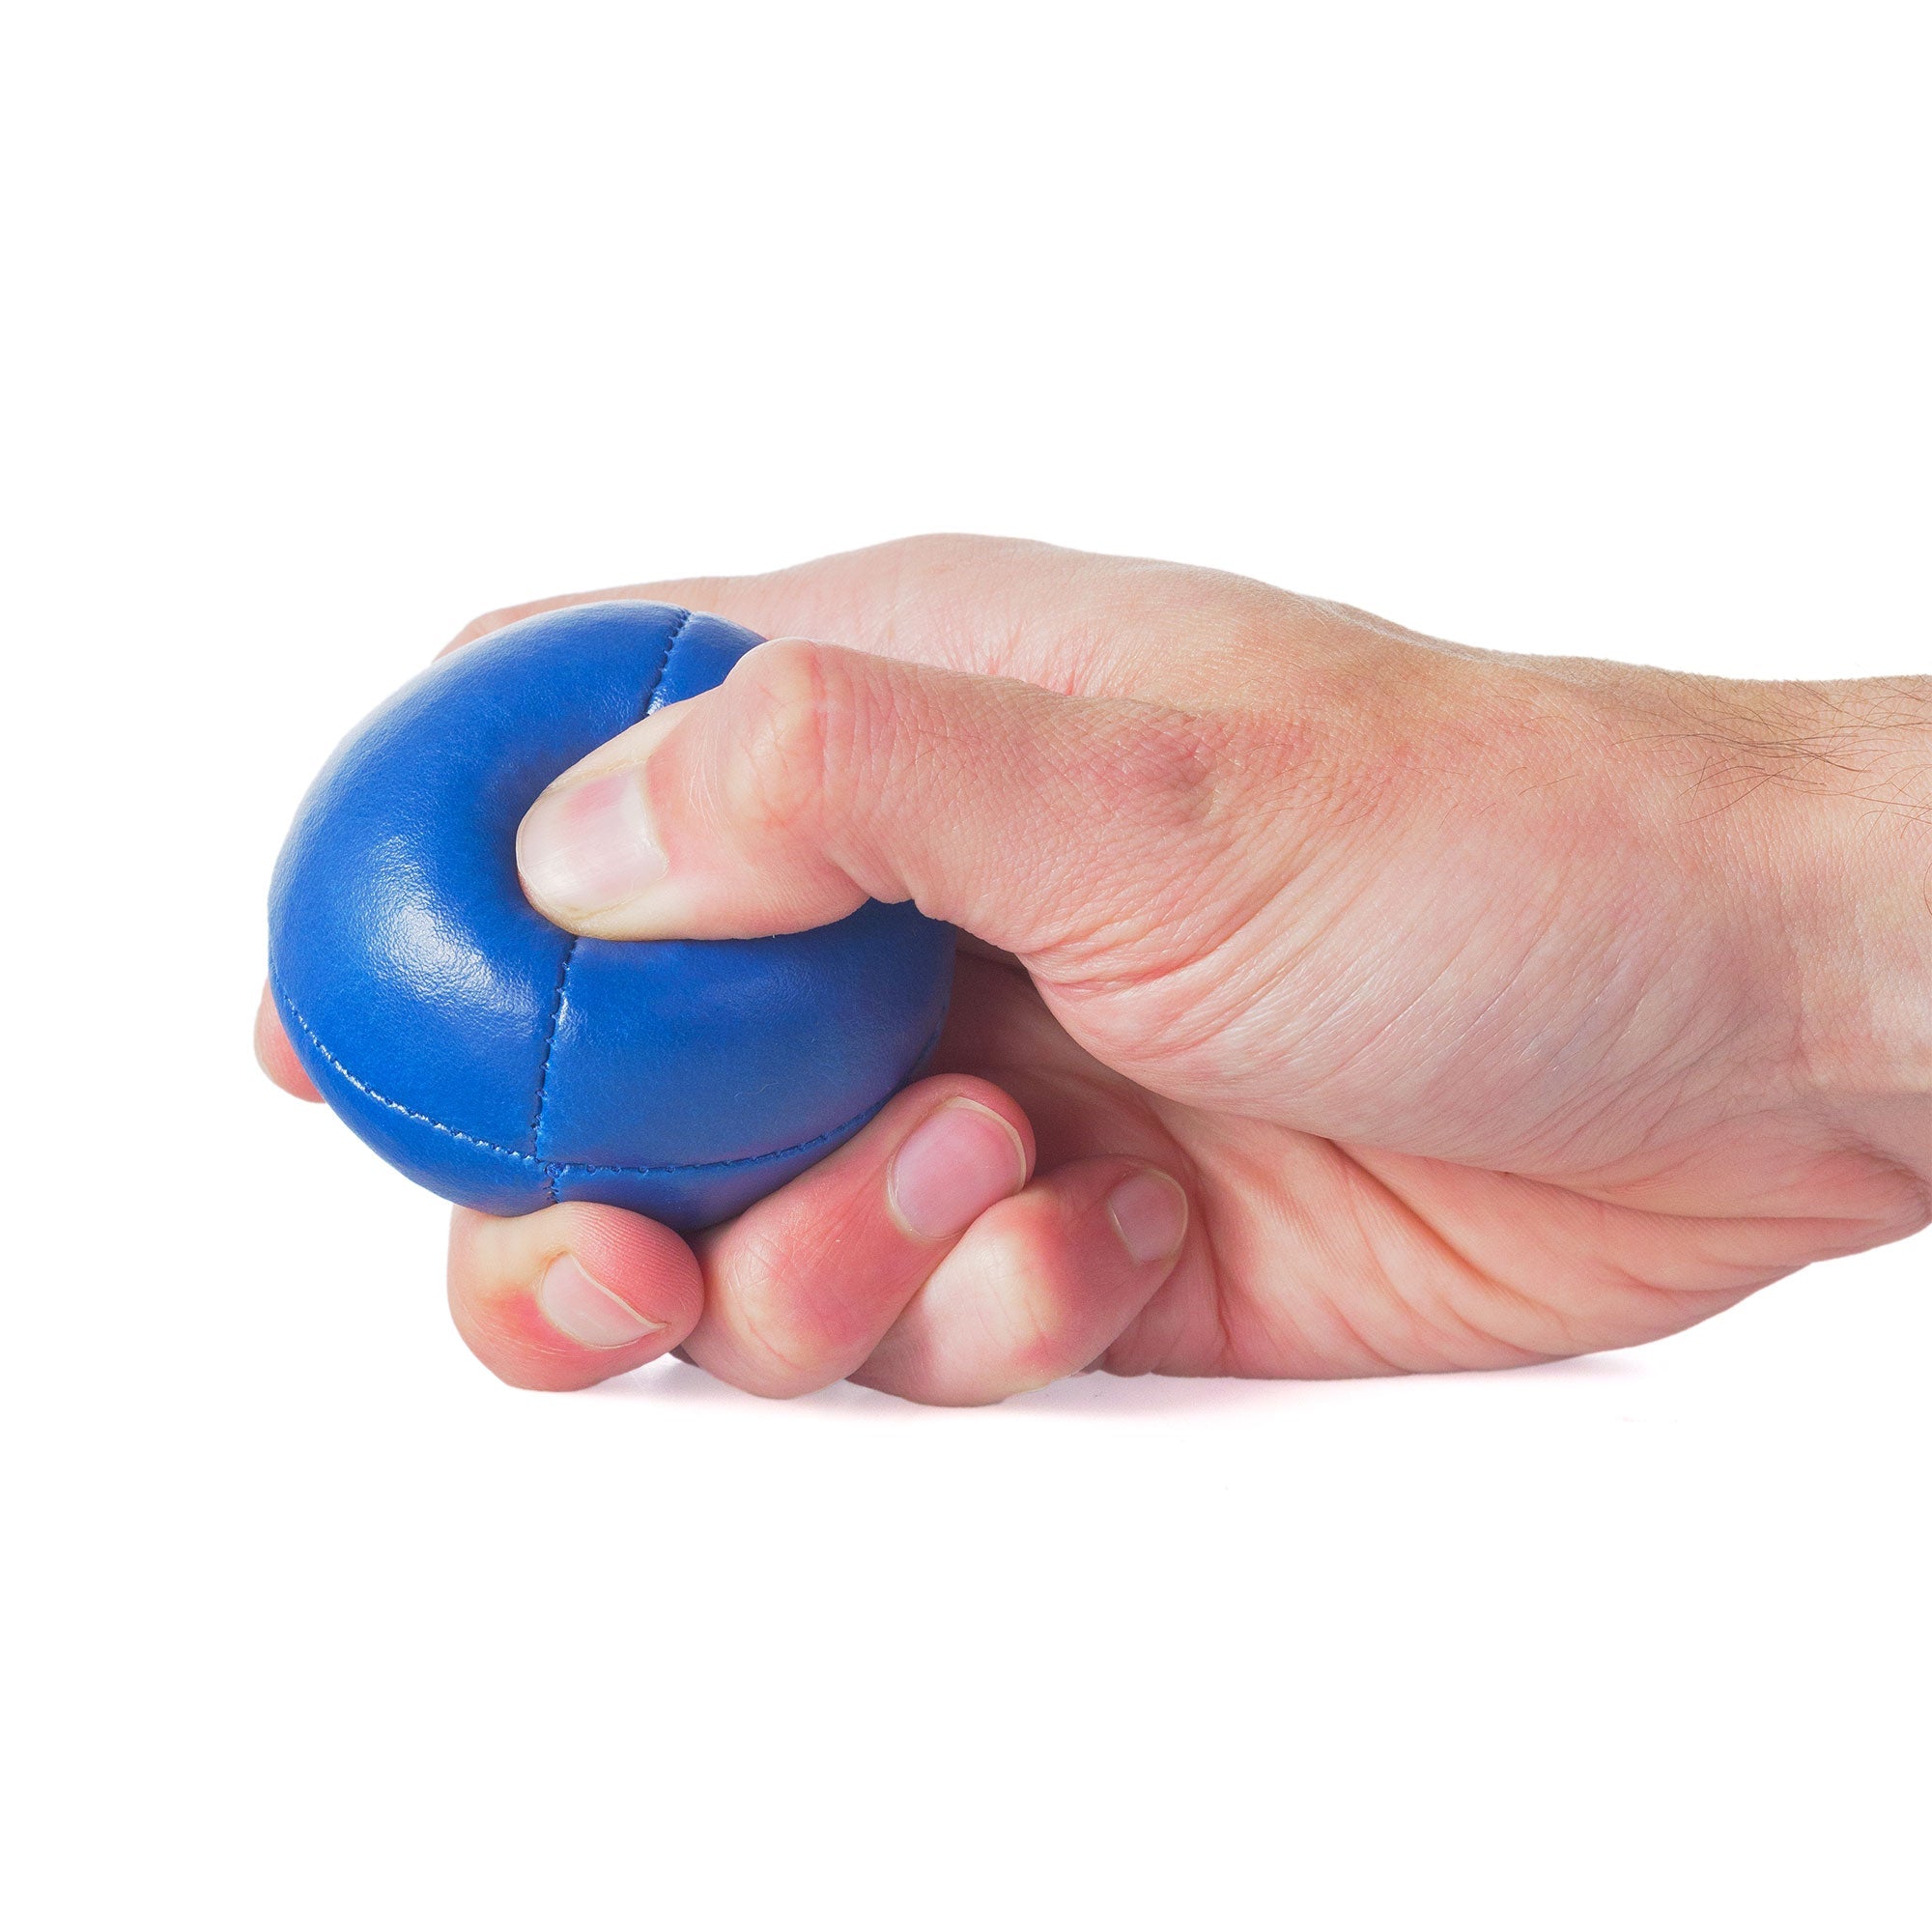 blue ball in hand